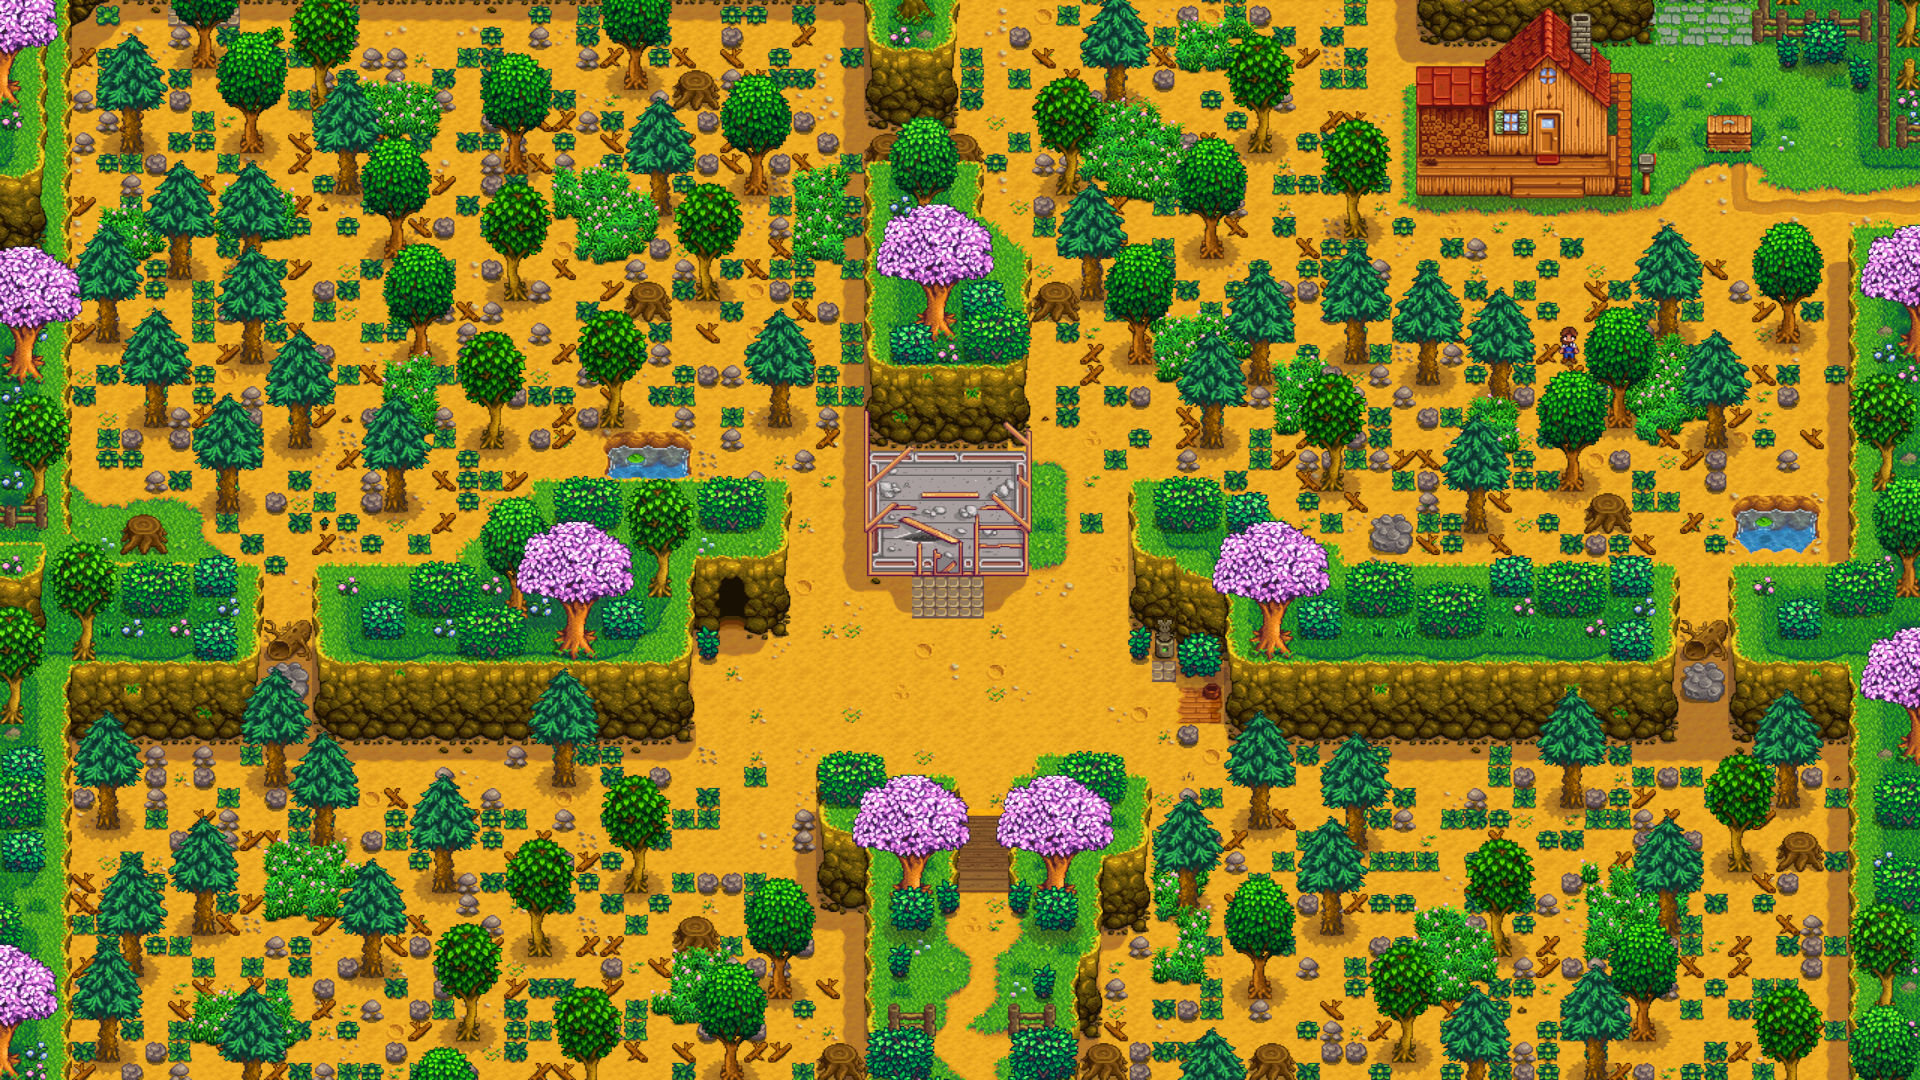 Co-Optimus - Stardew Valley (Xbox One) Co-Op Information